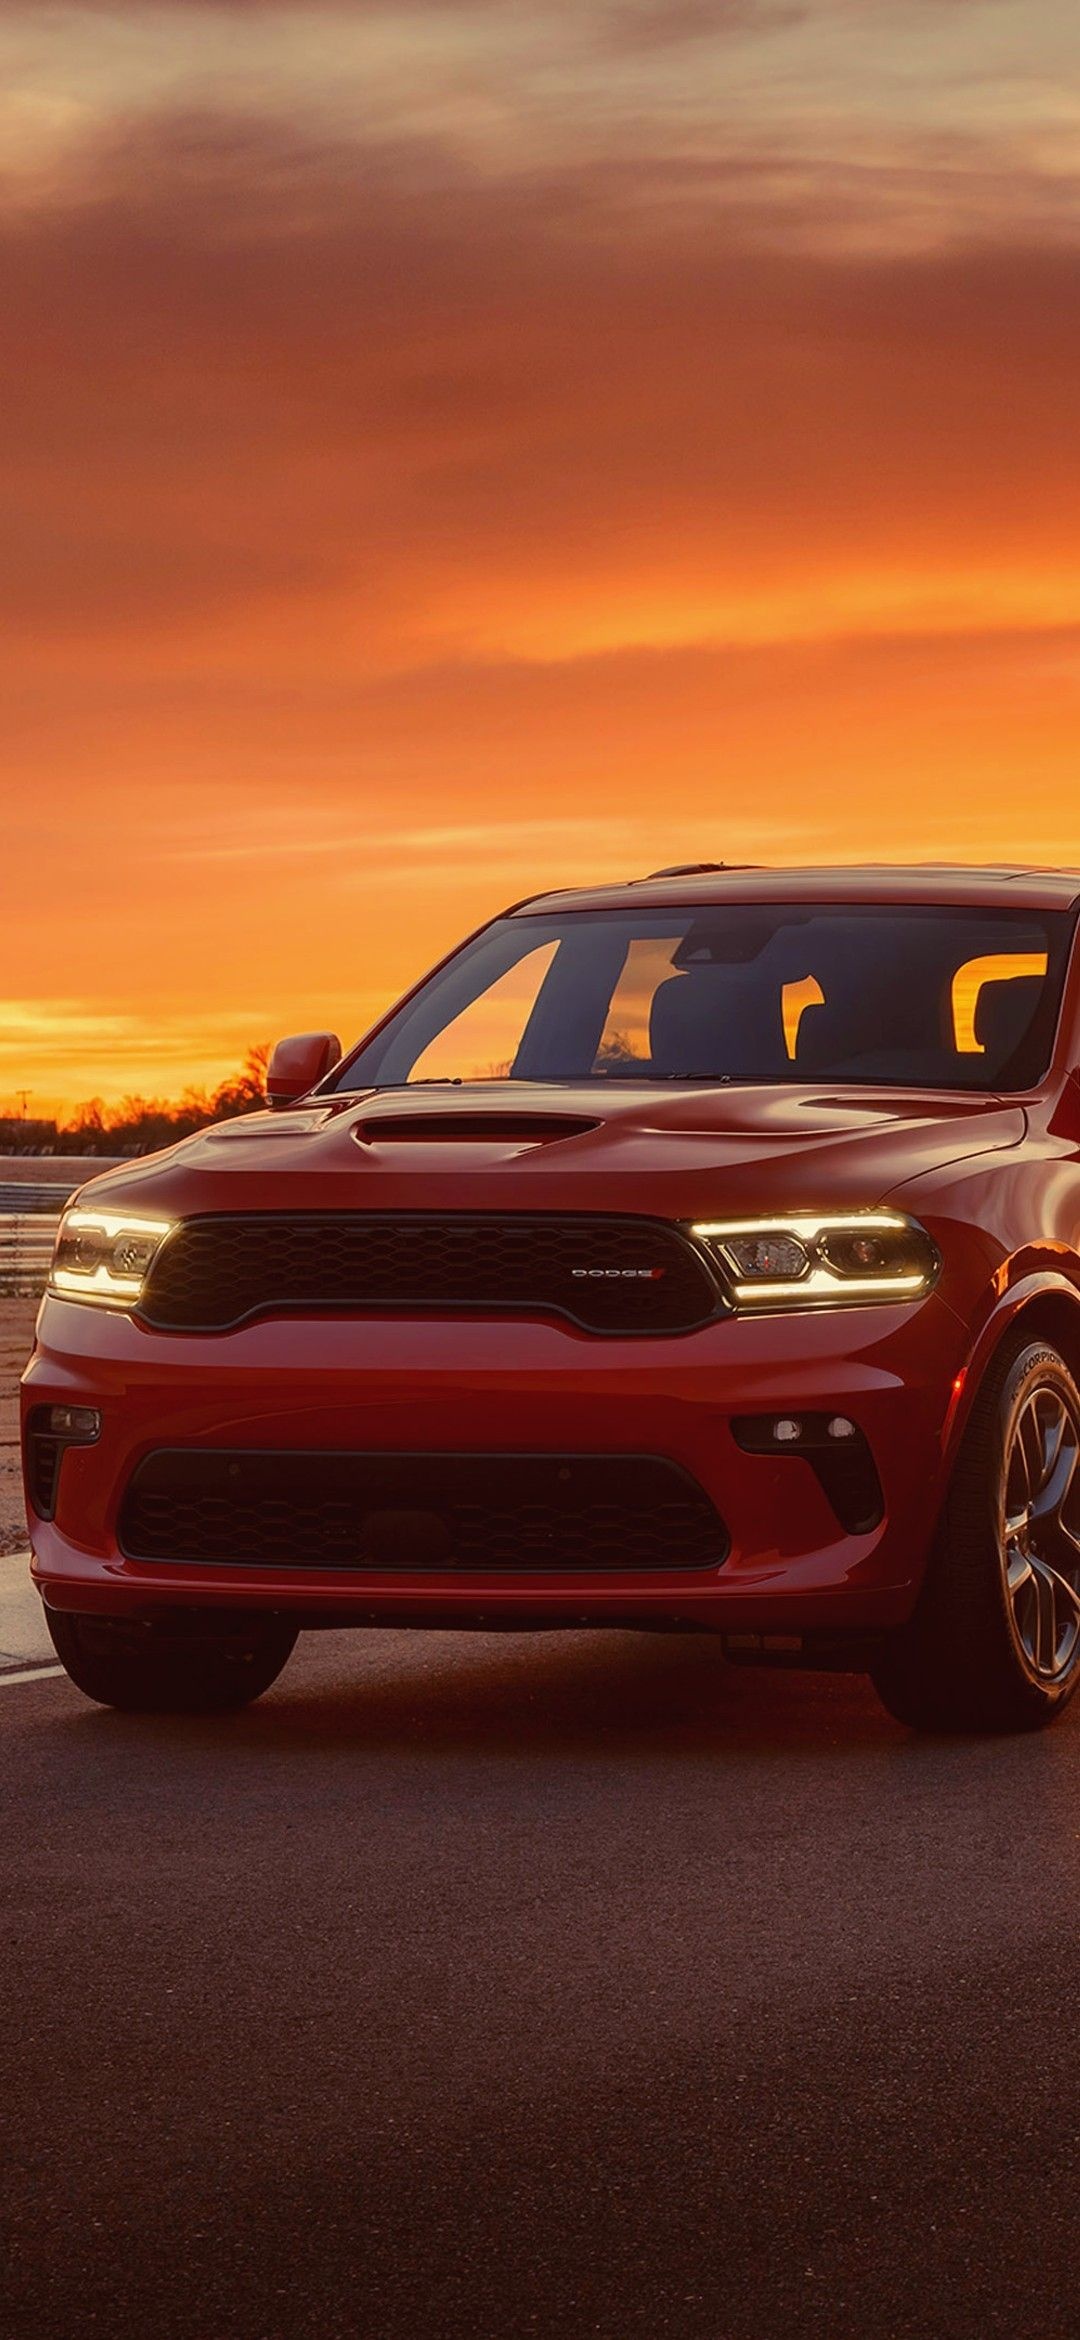 Dodge Durango, Mobile full HD wallpapers, Cool and stunning, Perfect for your device, 1080x2340 HD Handy